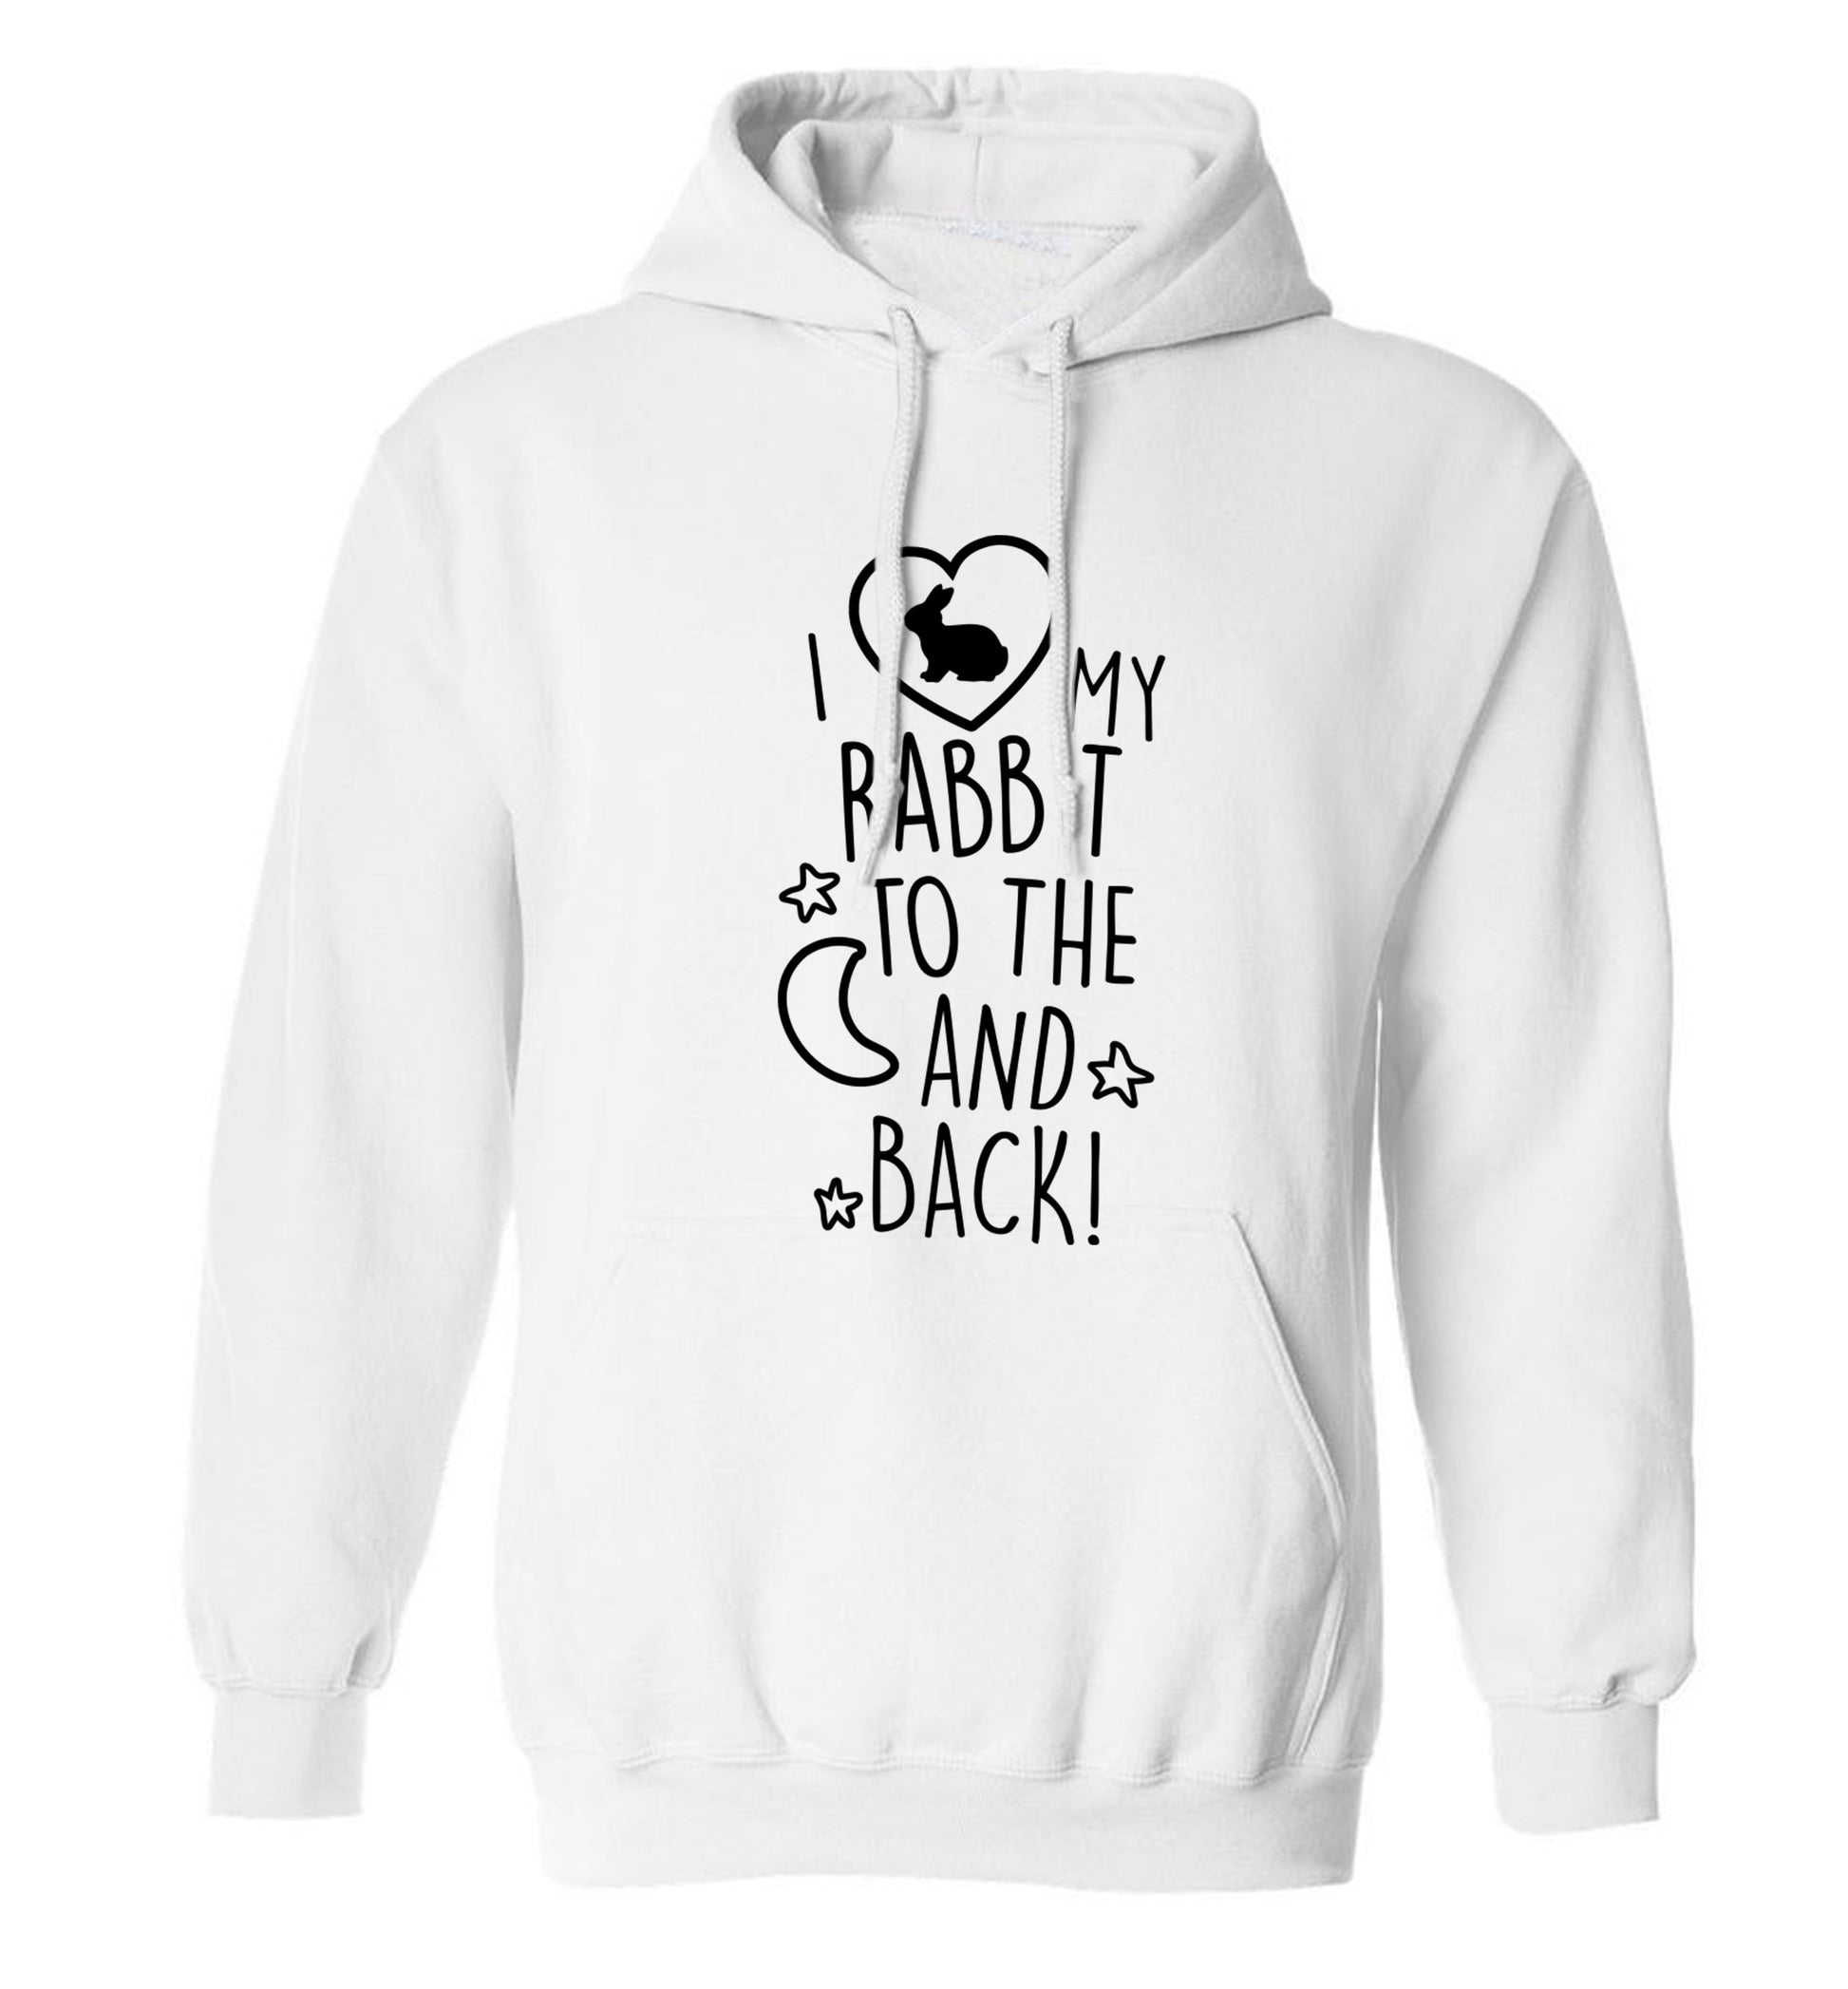 I love my rabbit to the moon and back adults unisex white hoodie 2XL